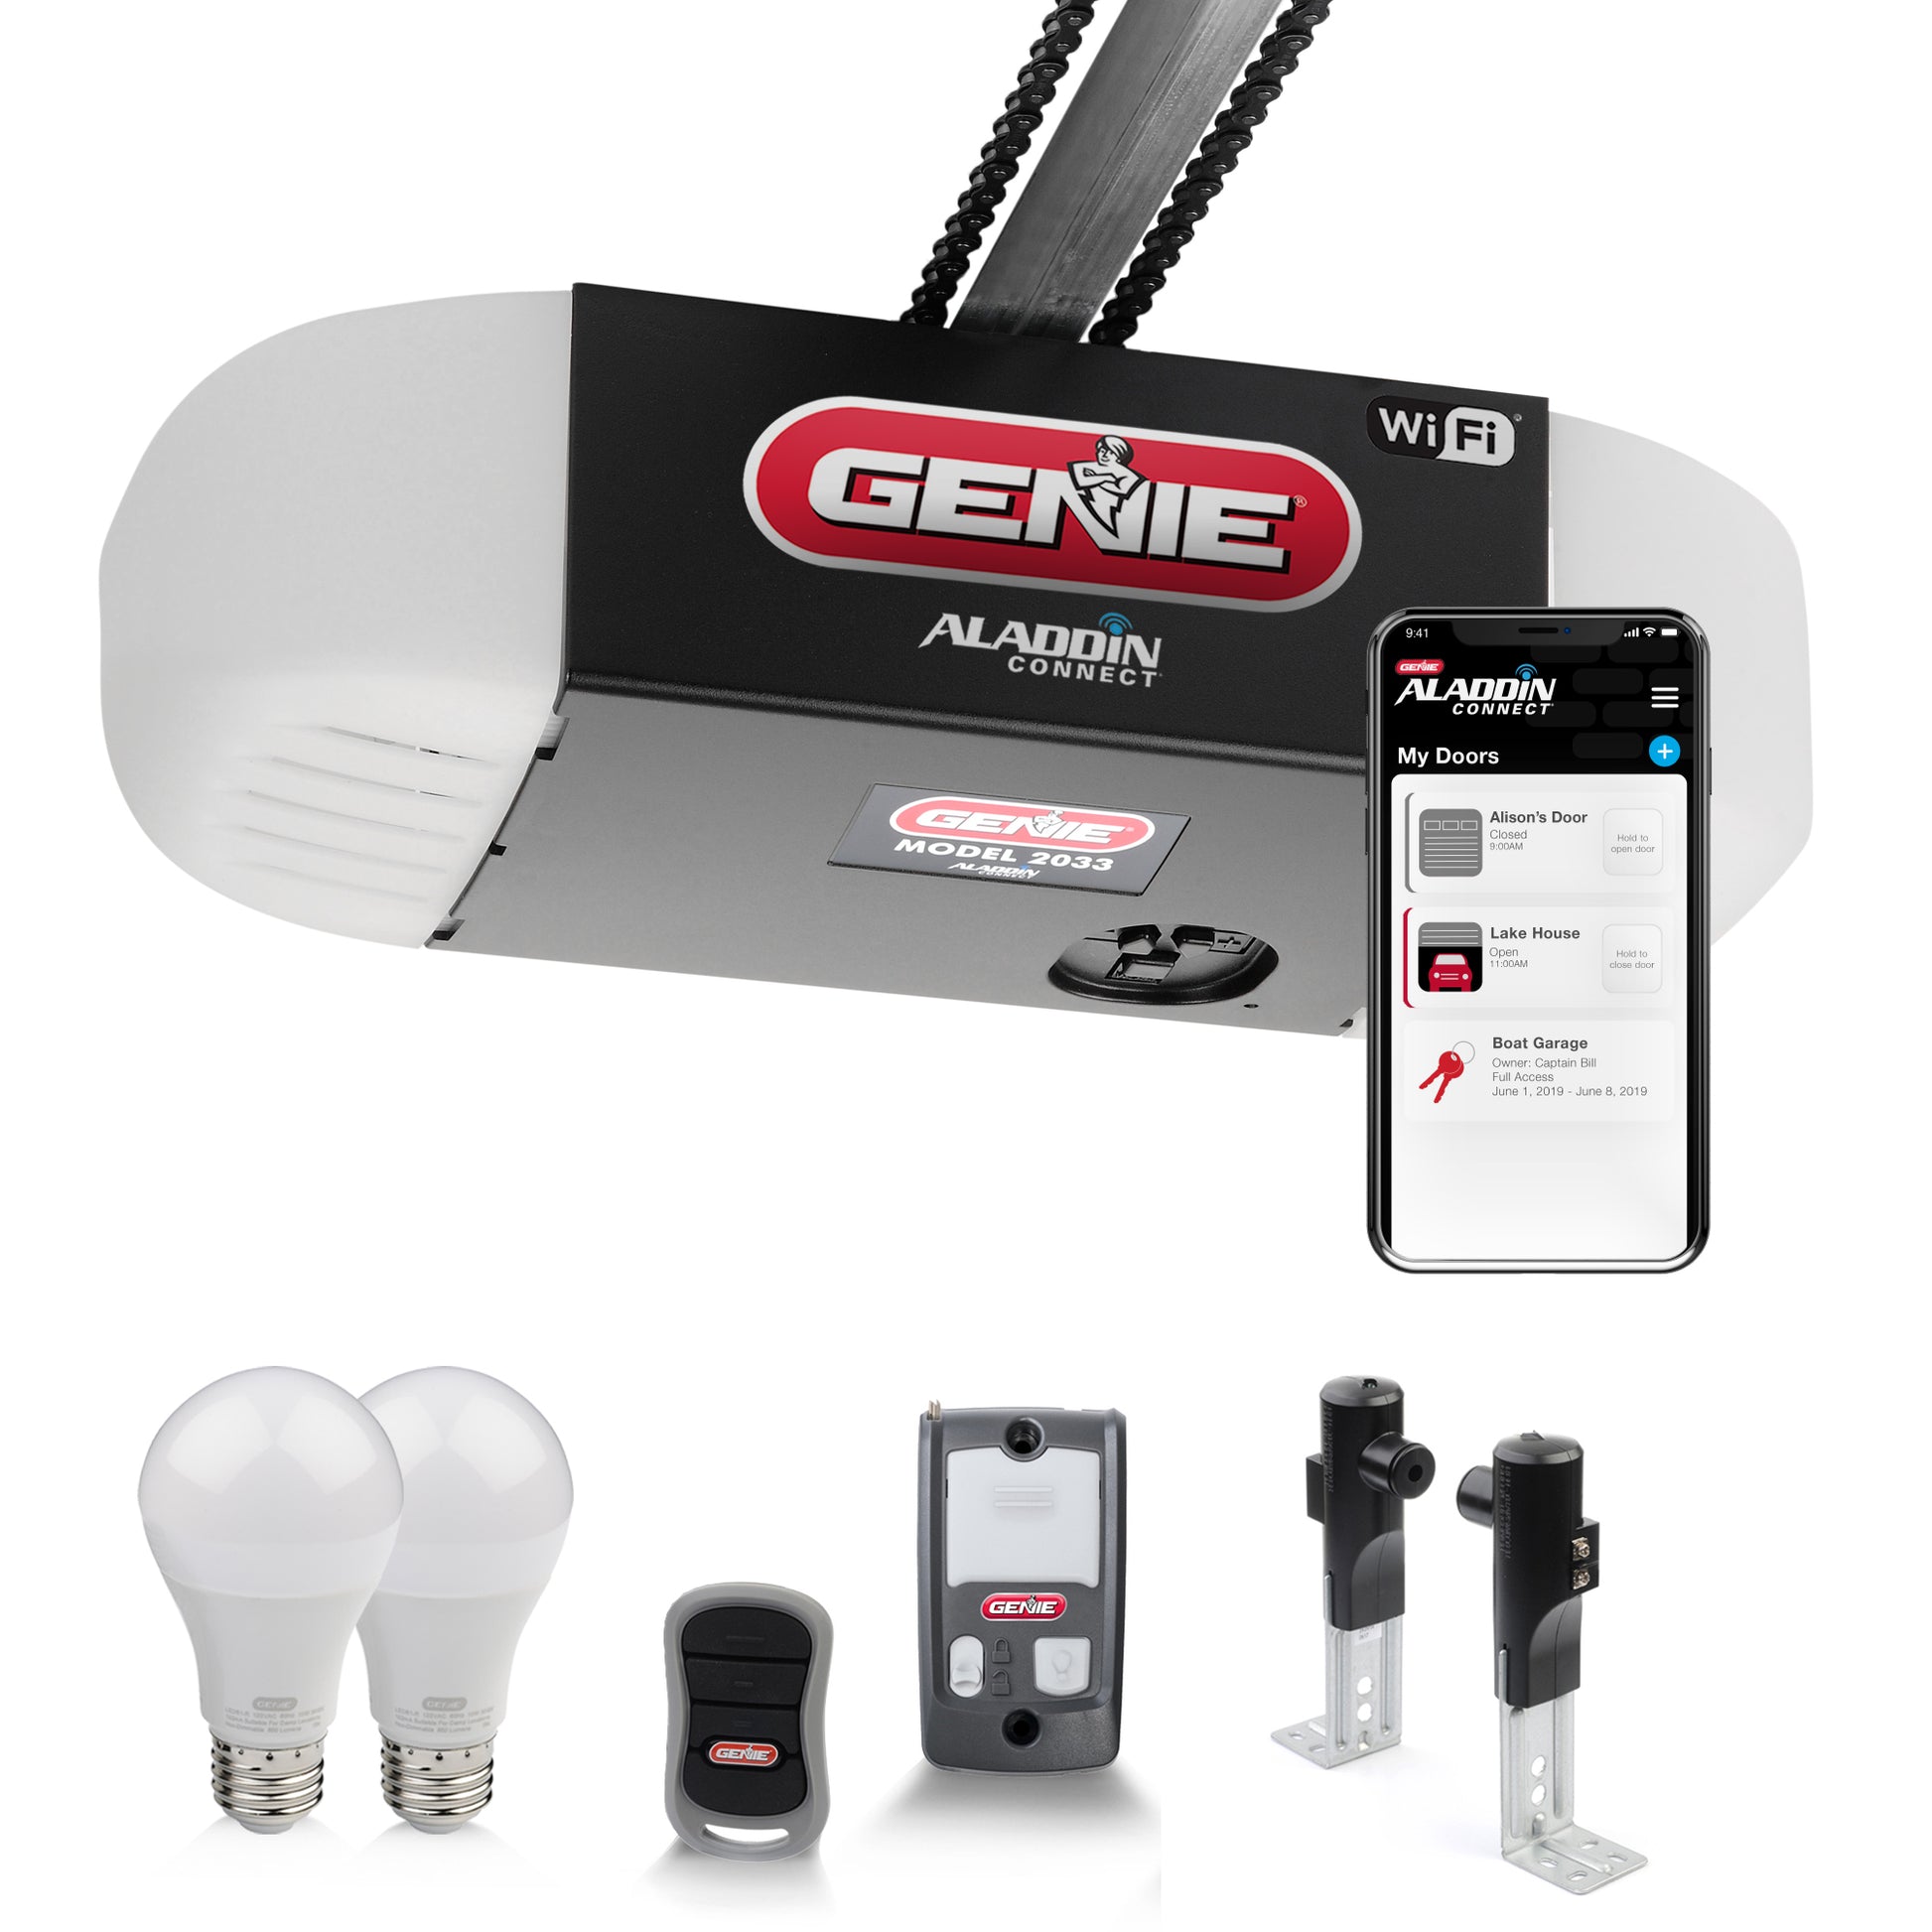 Chain Glide Connect Essentials- 1/2 HPc Durable Chain Drive Smart Garage Door Opener with LED Lights Included